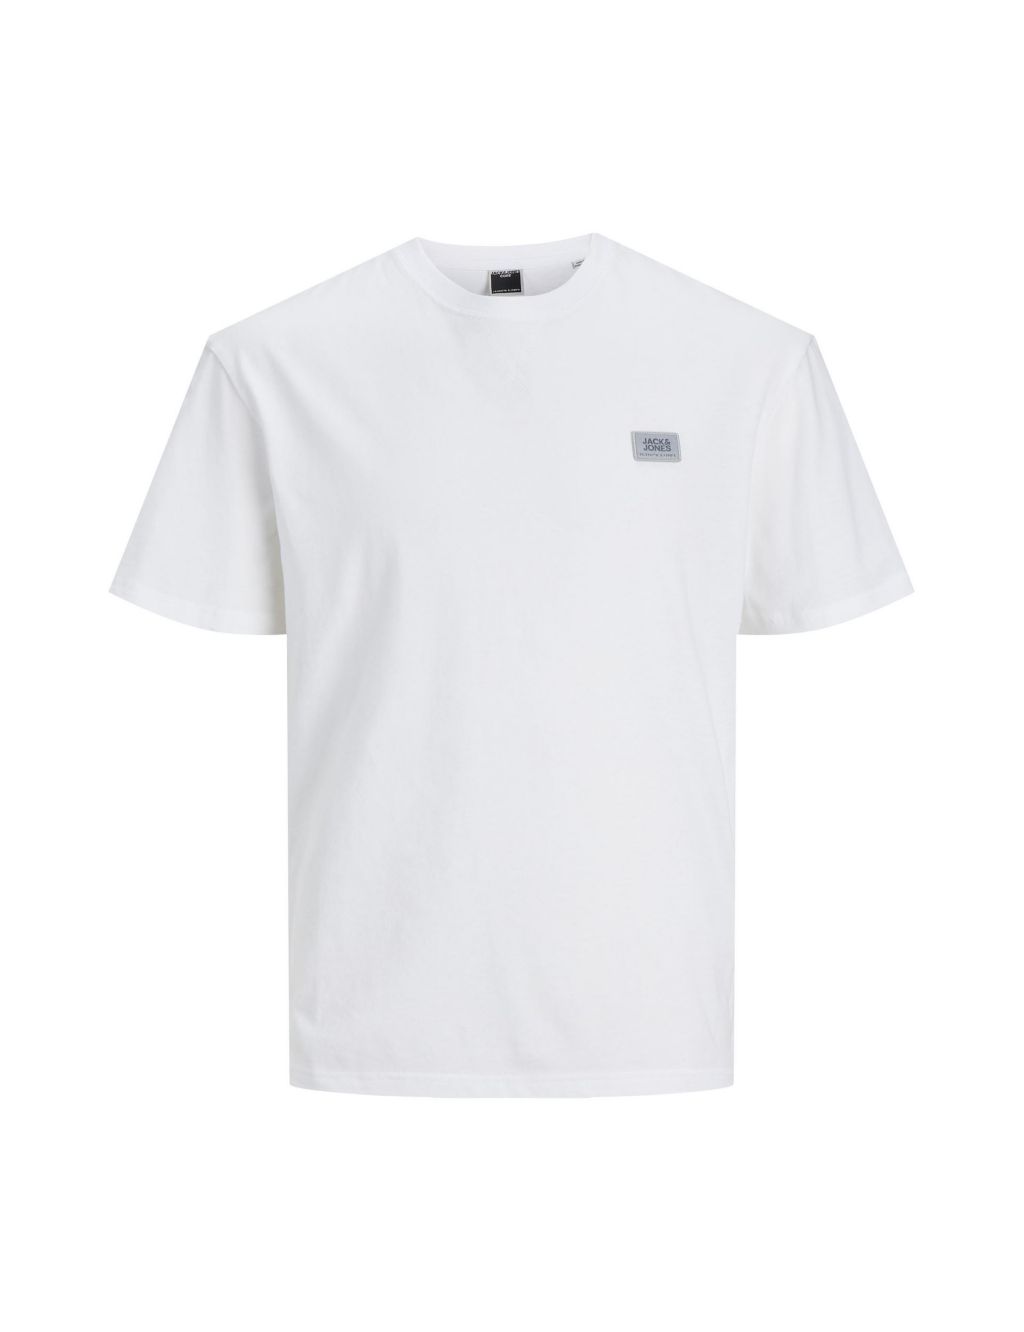 Relaxed Fit Pure Cotton T-Shirt image 2